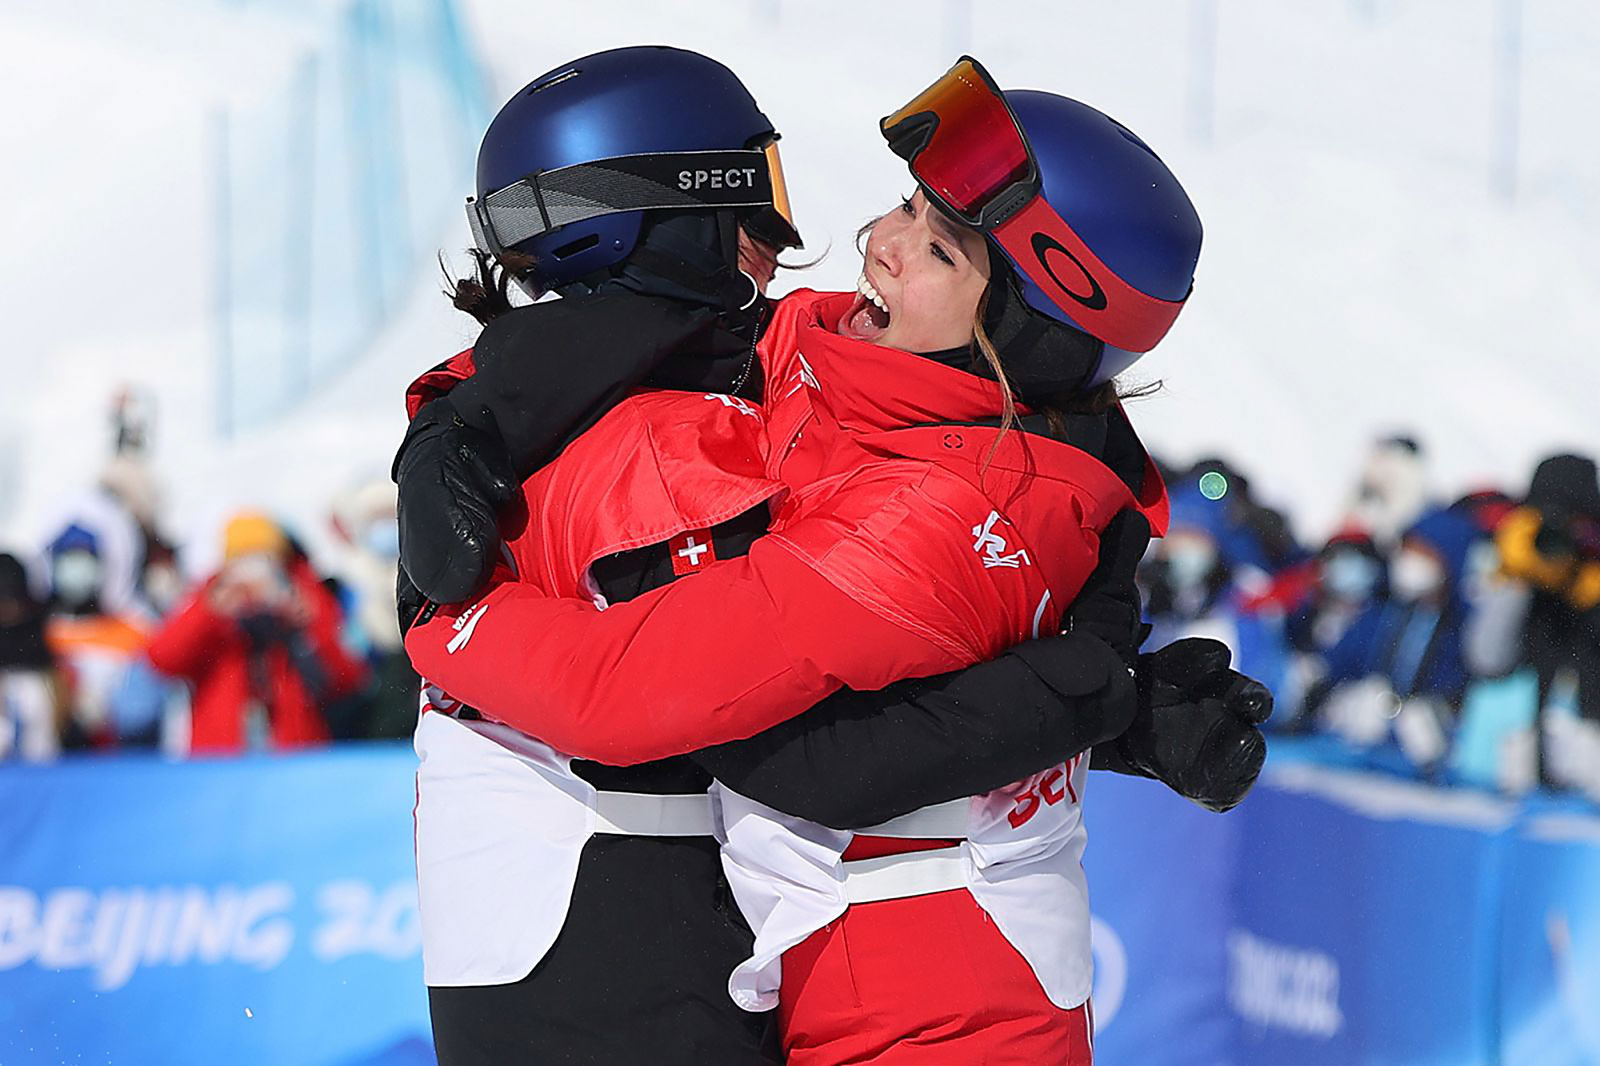 Swiss freestyle skier Mathilde Gremaud, left, hugs China's Eileen Gu after they finished 1-2 in the slopestyle finals on February 15. Both Gremaud and Gu have won two medals at these Games. Gremaud won a bronze earlier in the big air competition, while Gu won gold in that event.